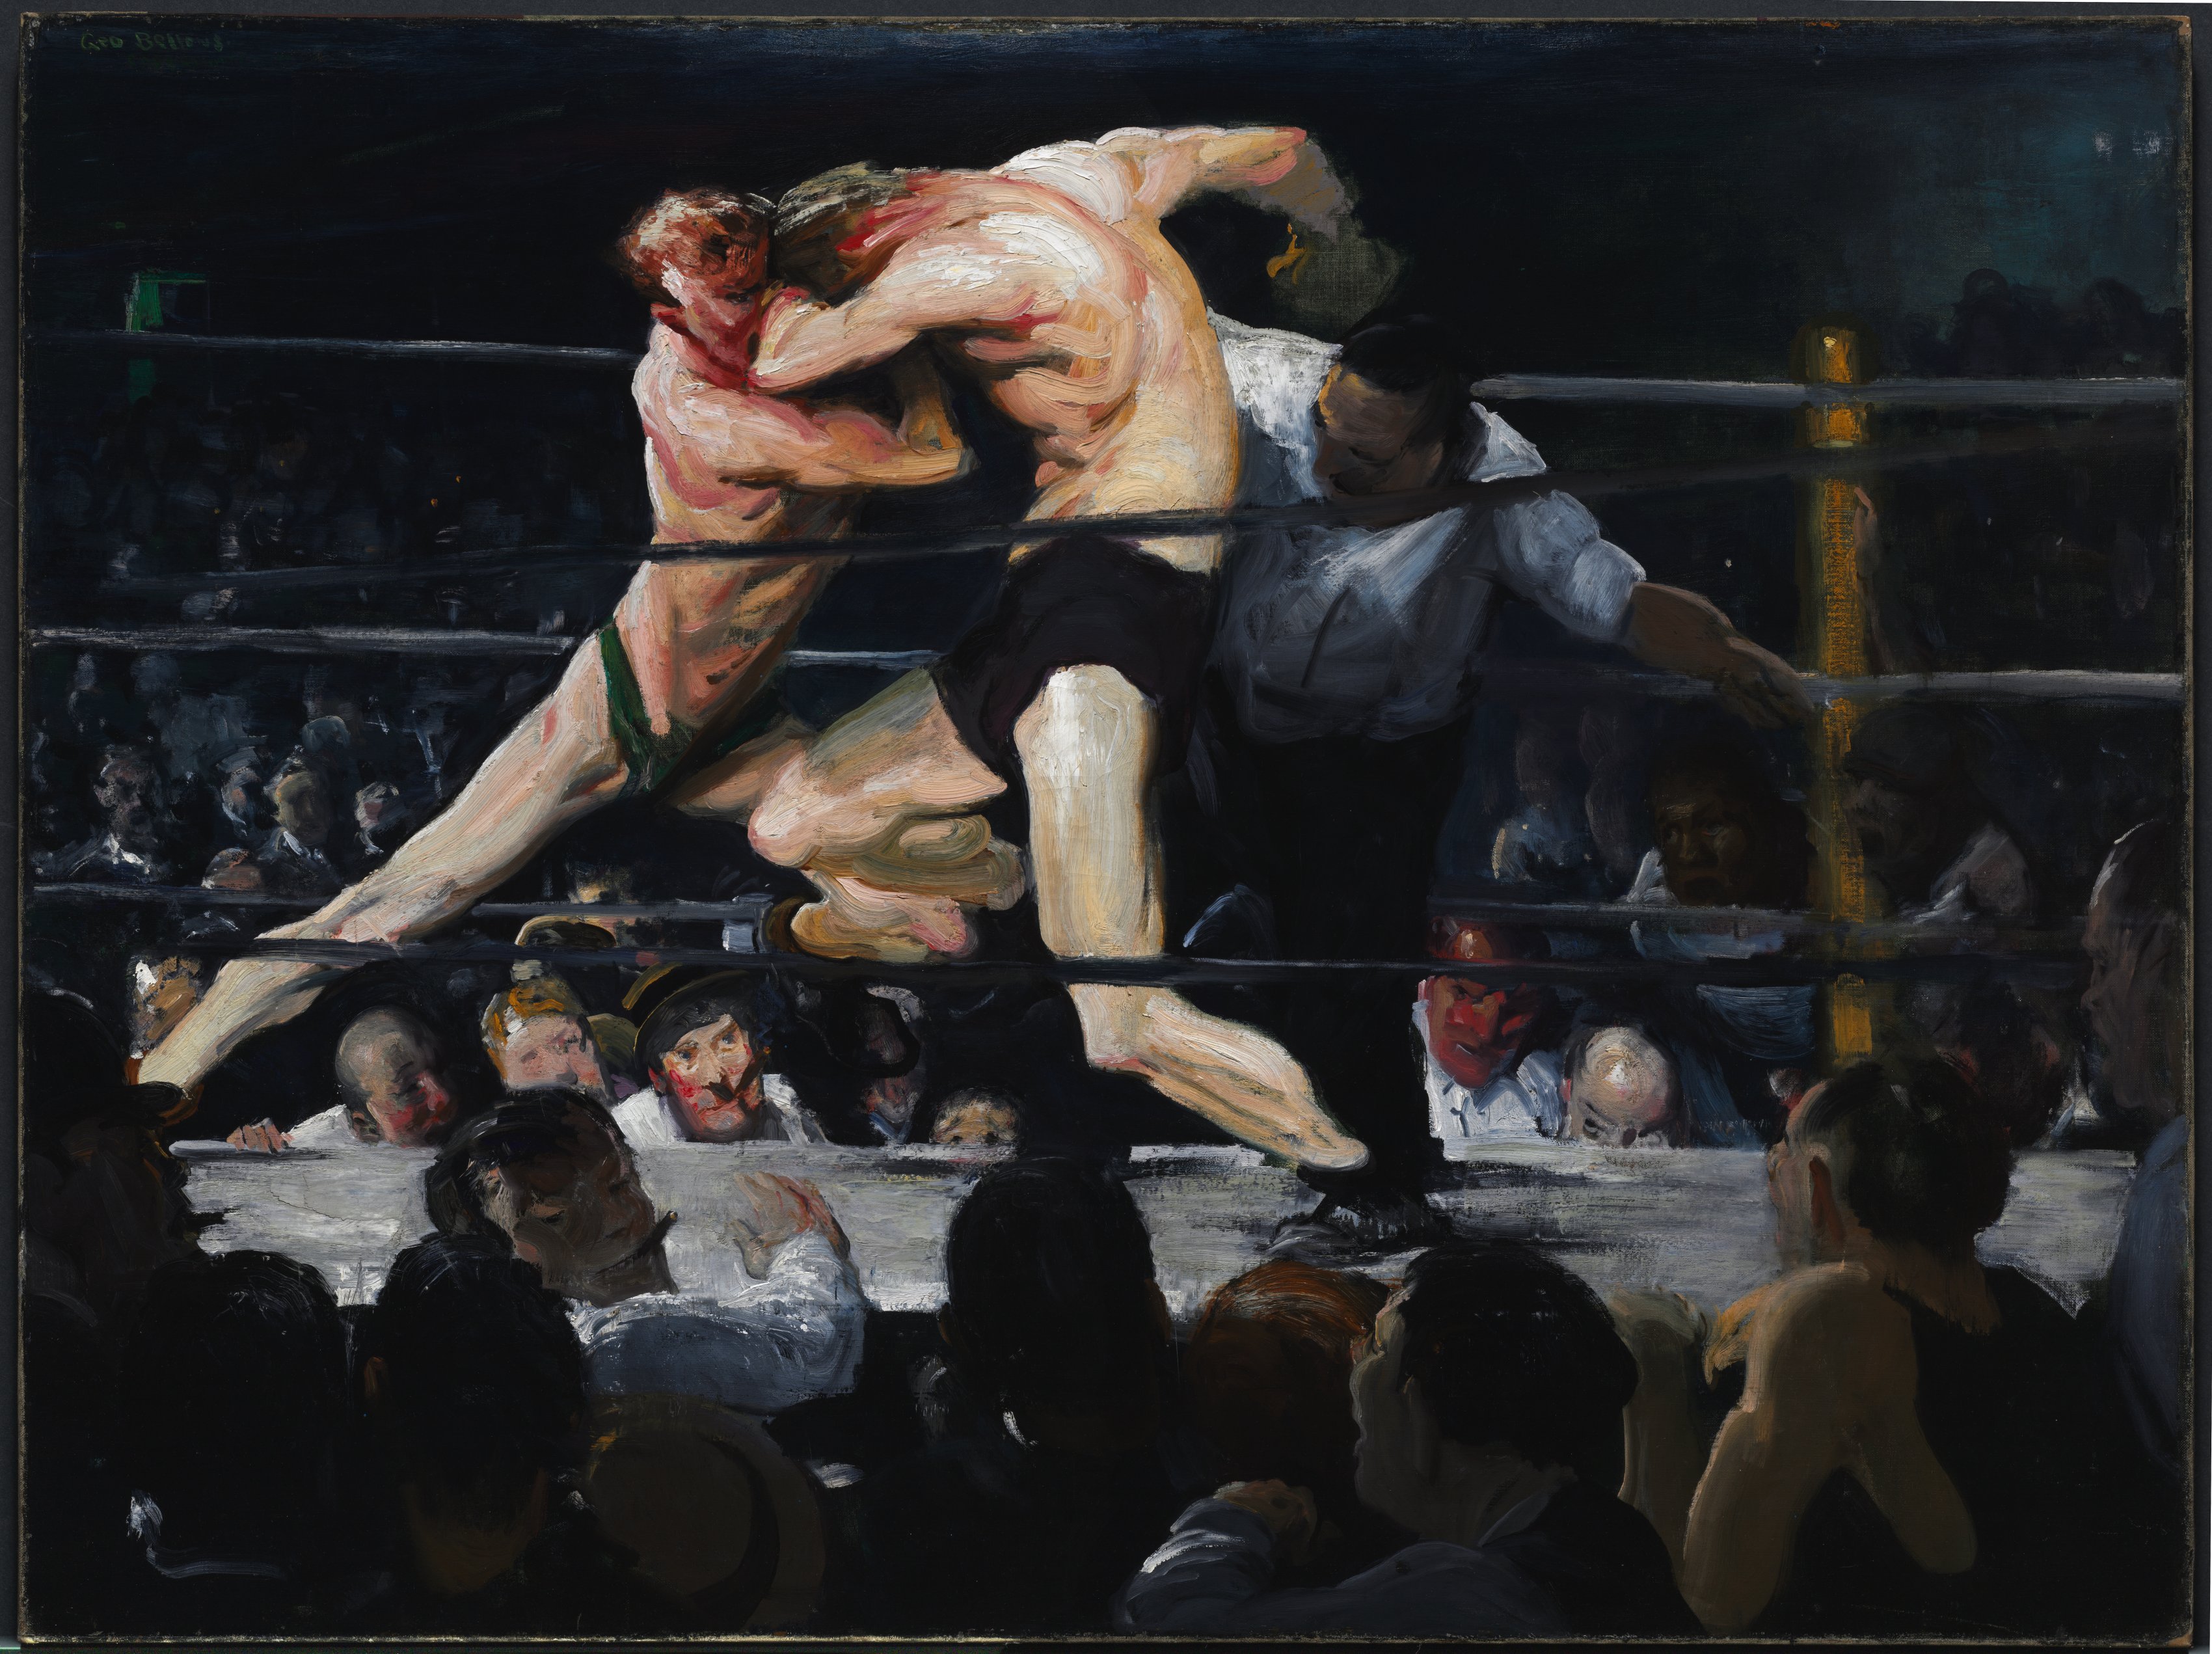 Stag at Sharkey's by George Bellows - 1909 - 110 x 140.5 cm Cleveland Museum of Art